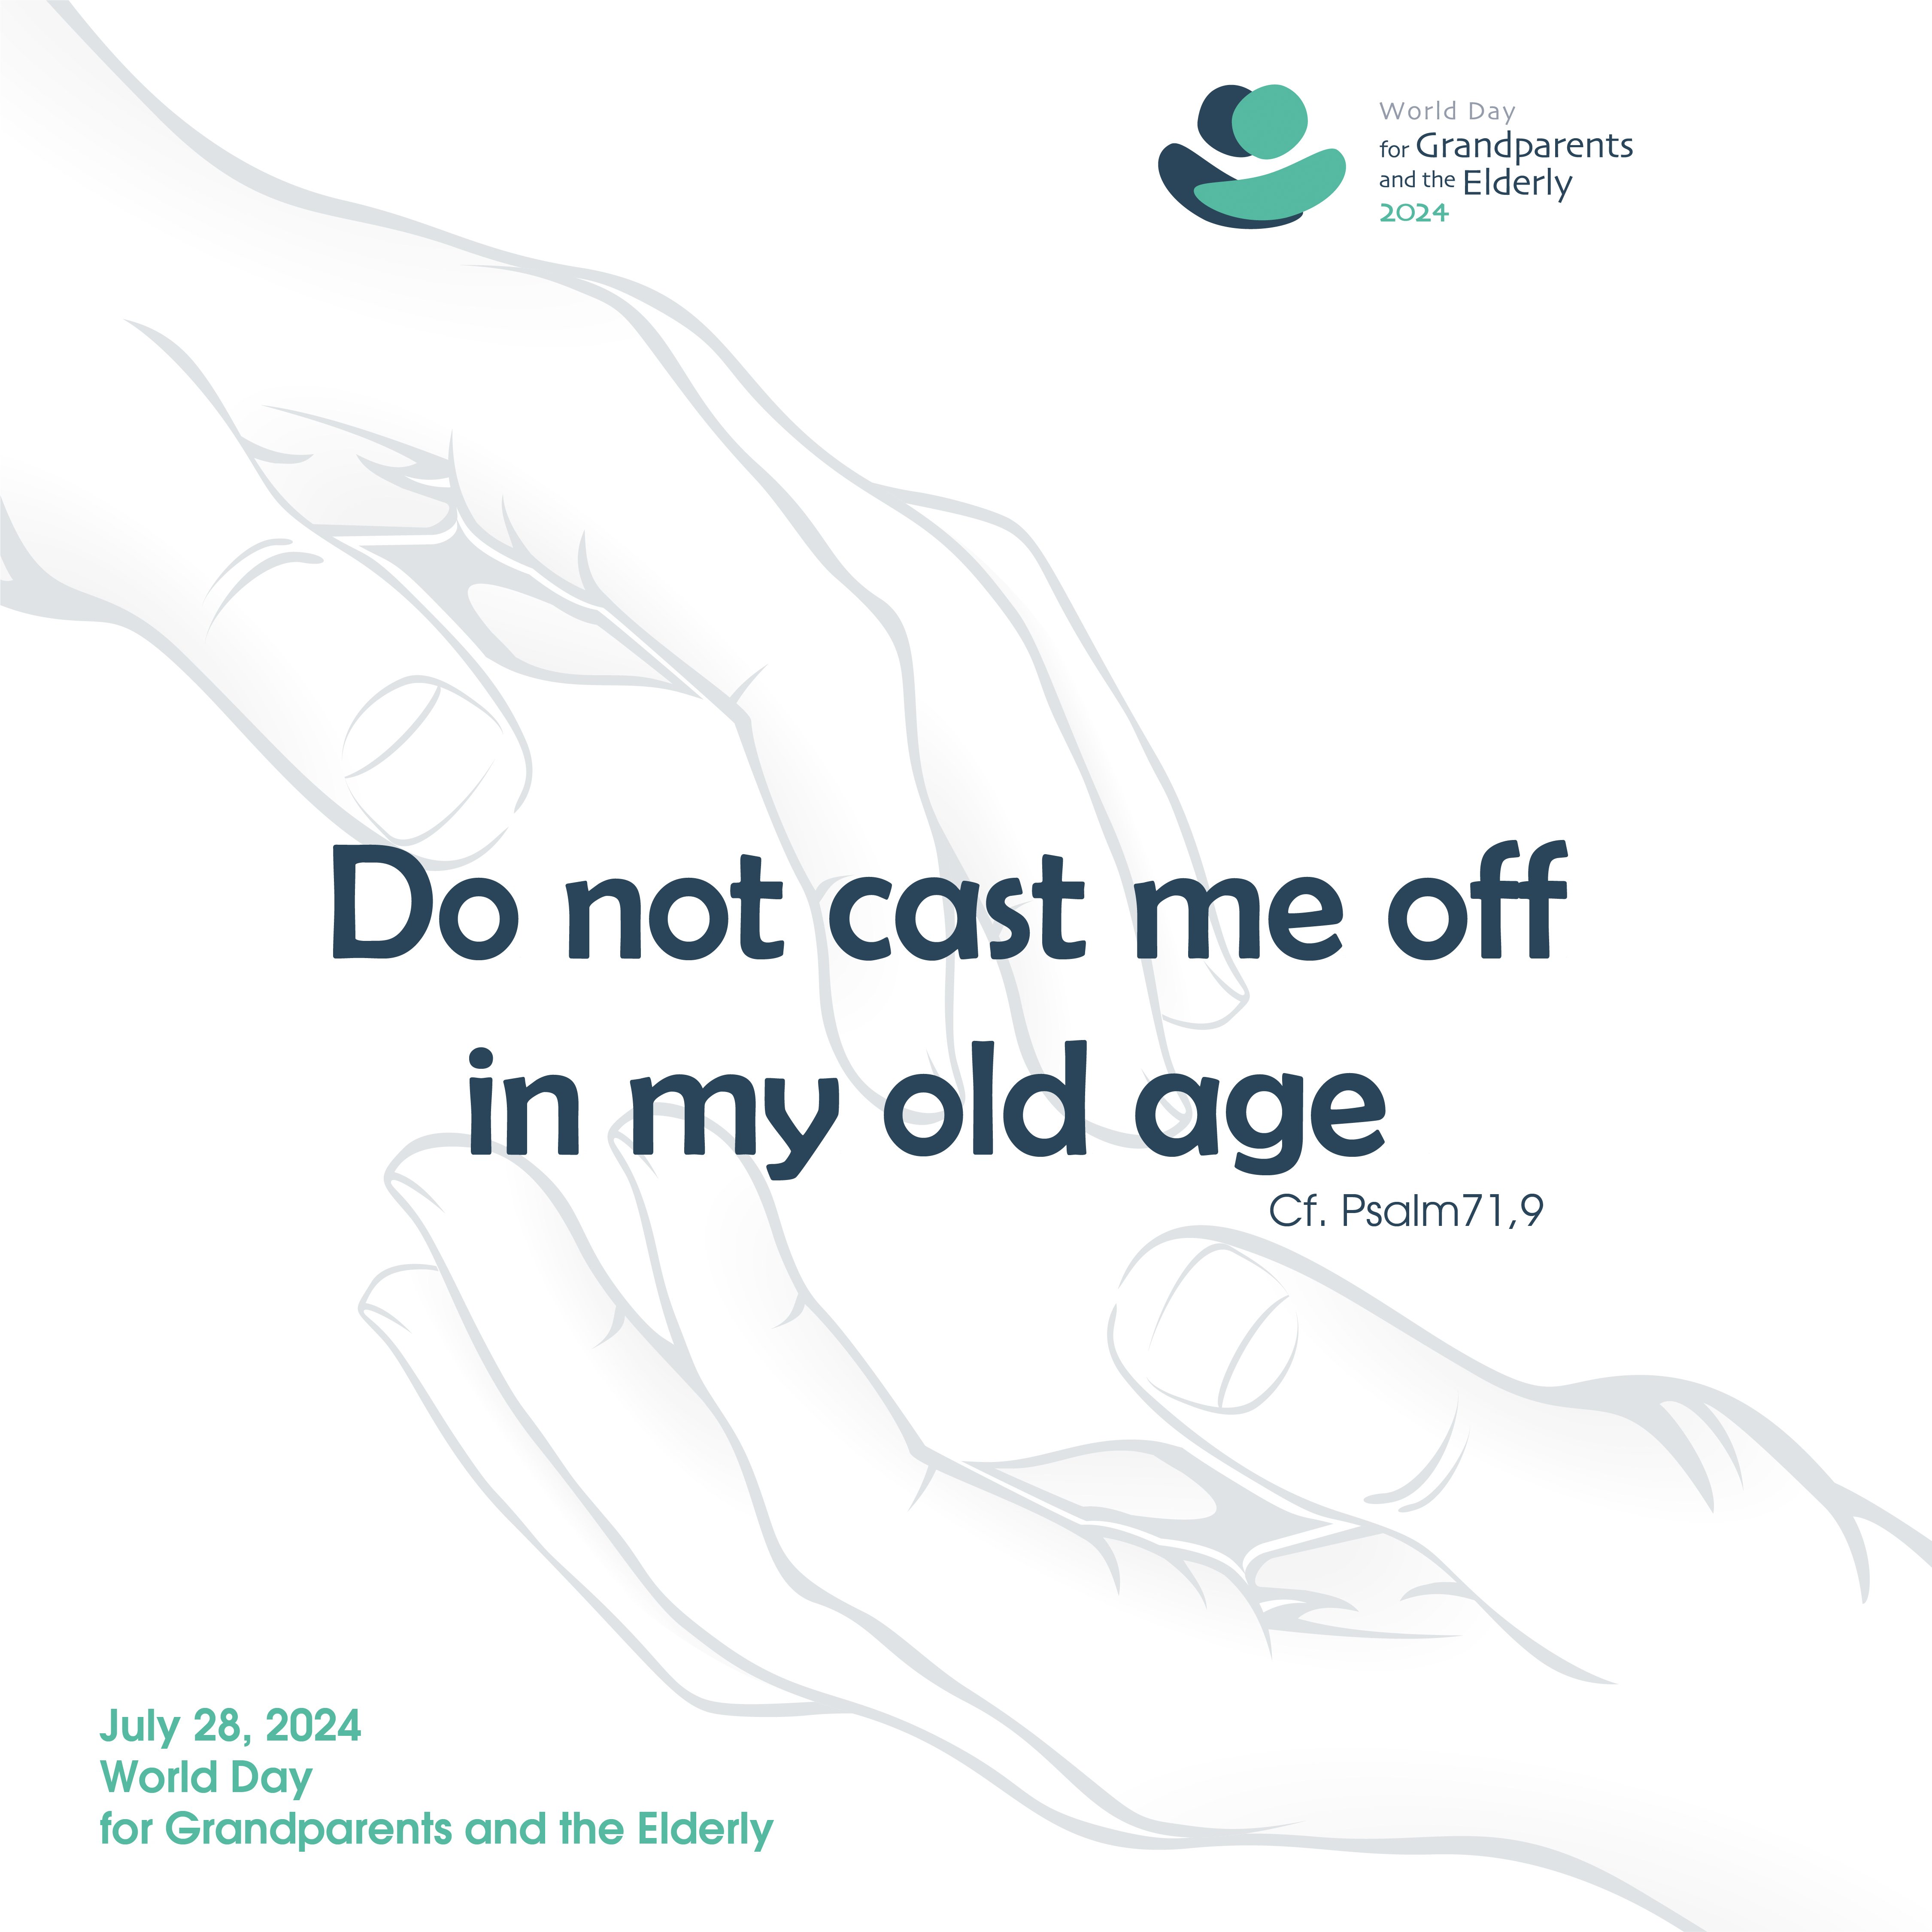 The logo for World Day of Grandparents and the Elderly 2024